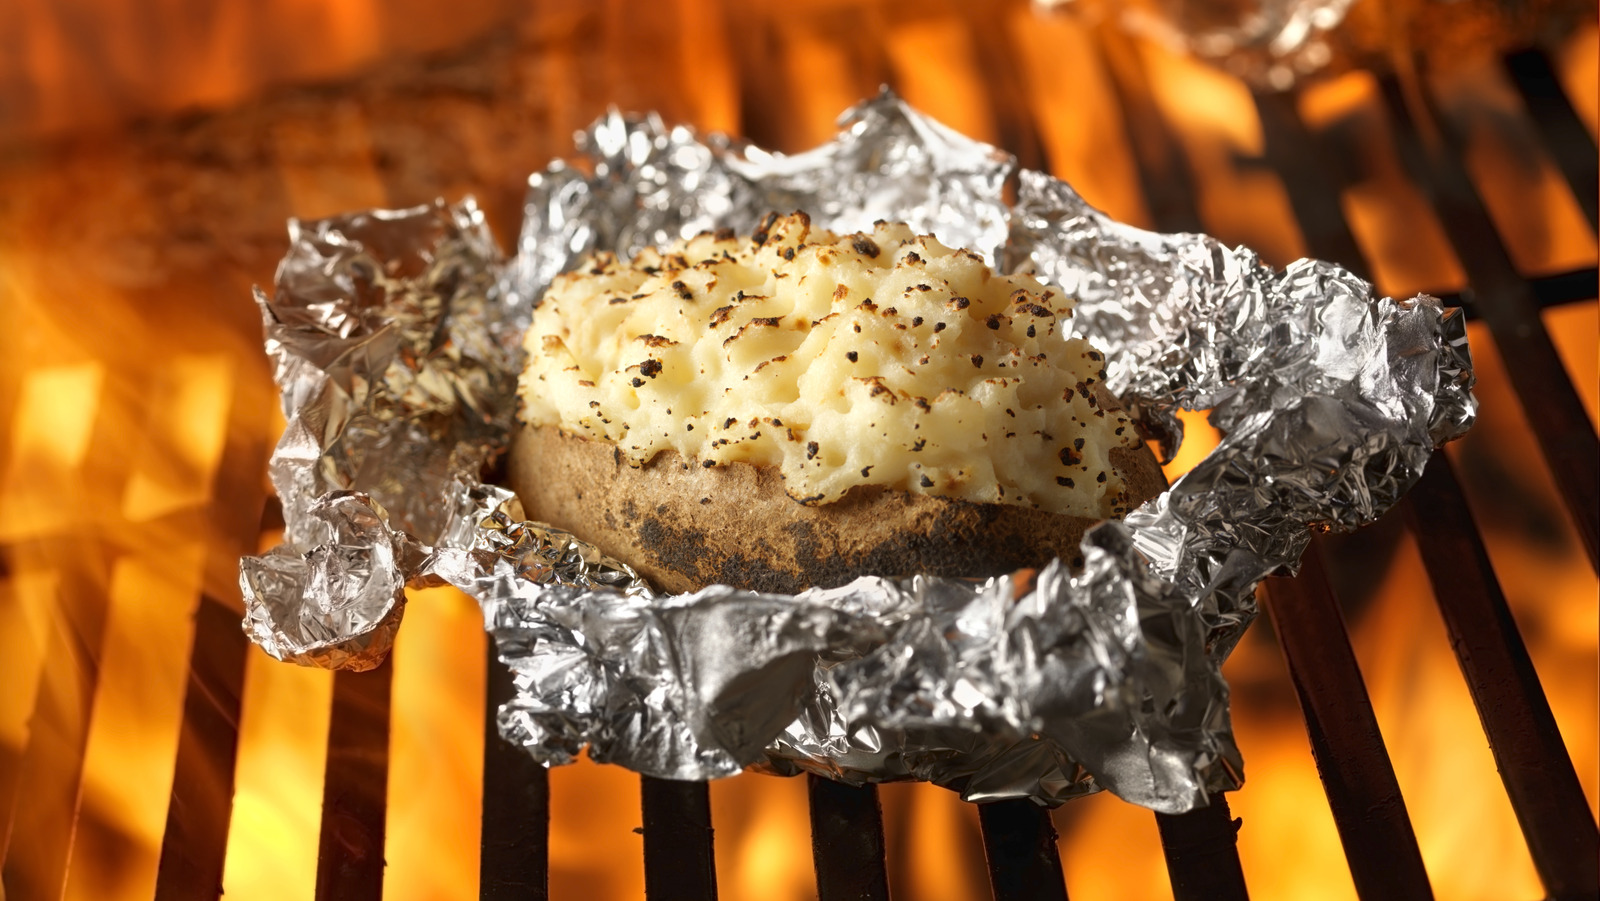 https://www.thedailymeal.com/img/gallery/why-you-should-rethink-using-aluminum-foil-this-grilling-season/l-intro-1683142165.jpg